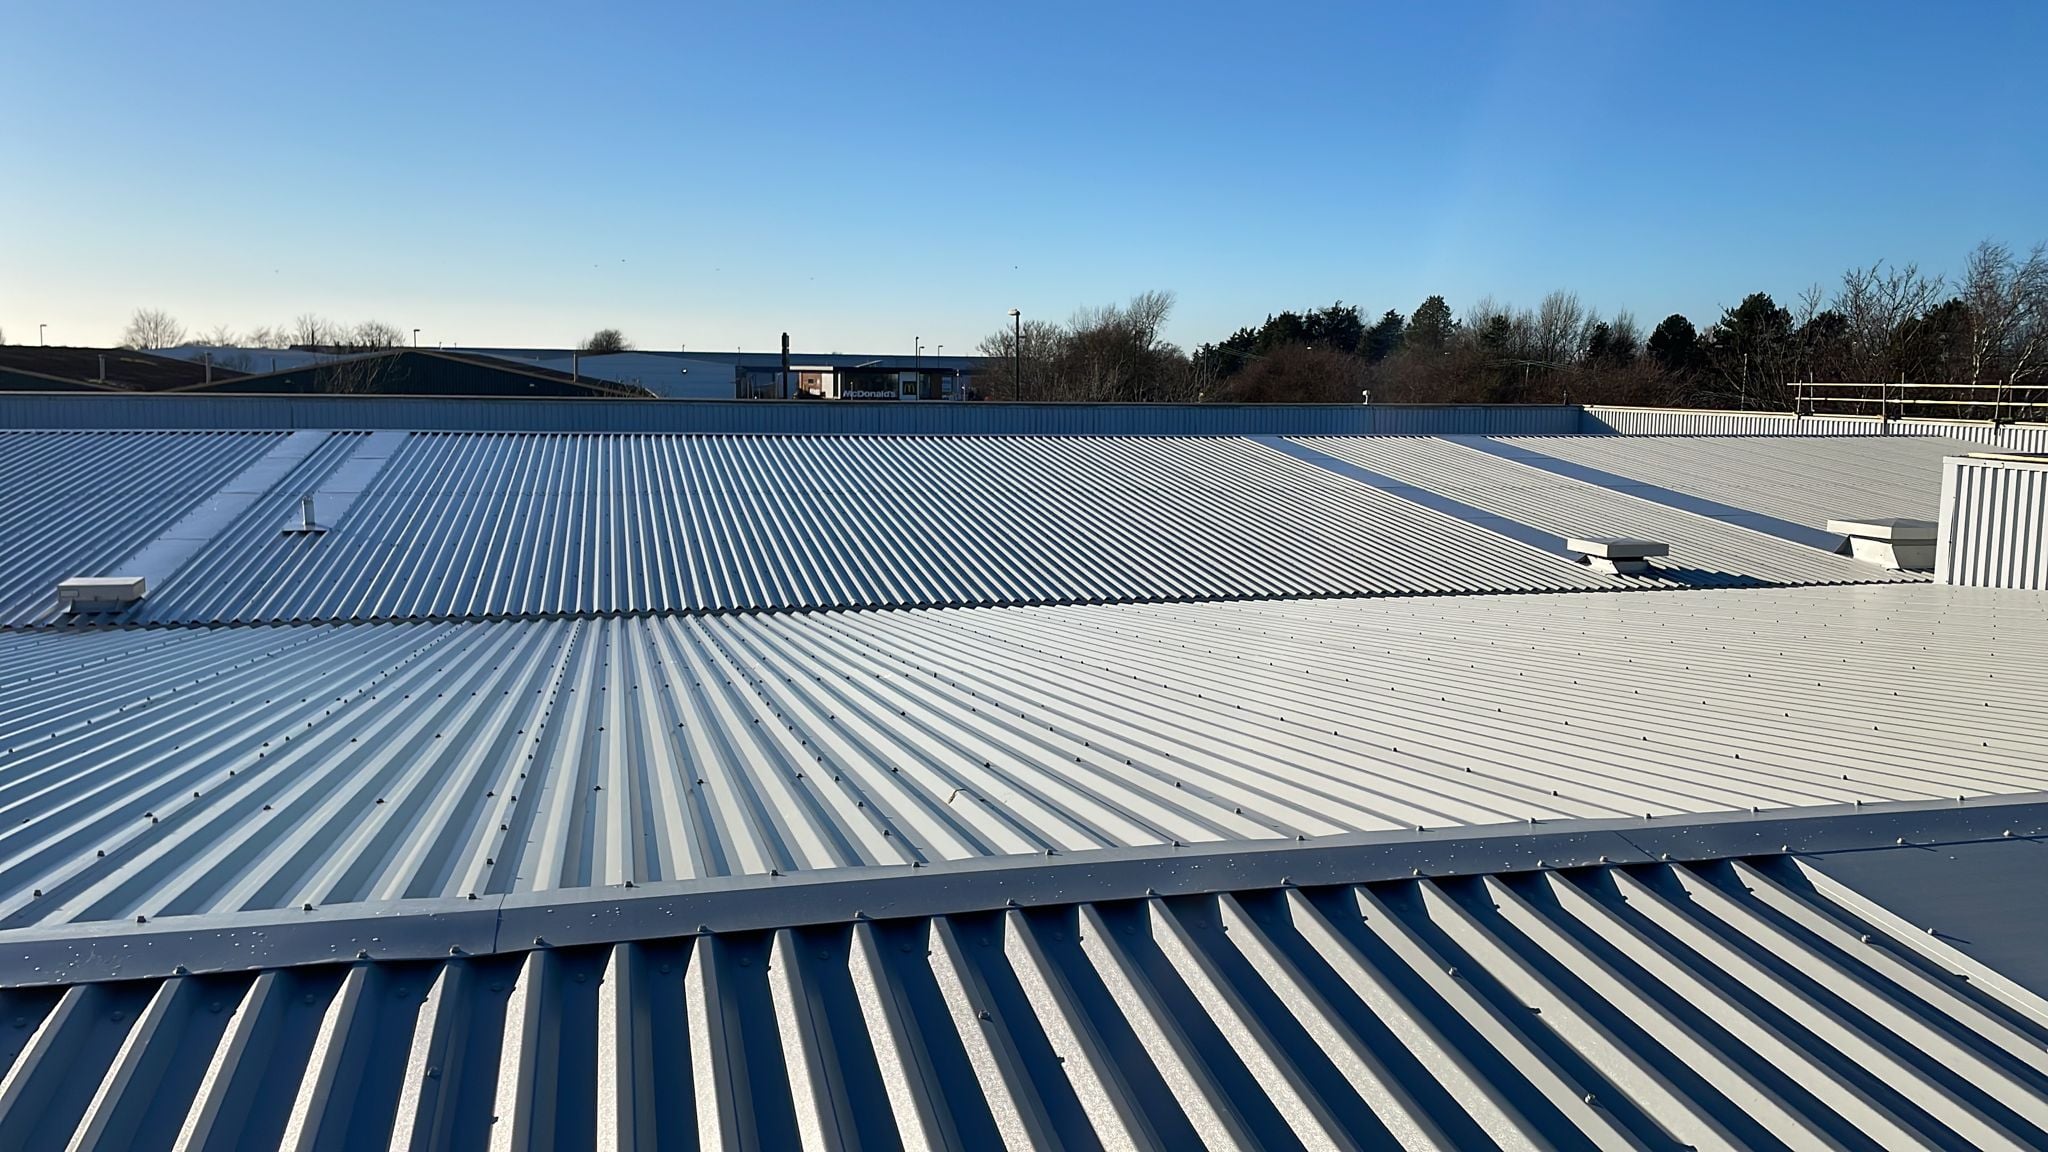 Over-roofing and rooflights to a workshop roof in Bognor Regis, West Sussex